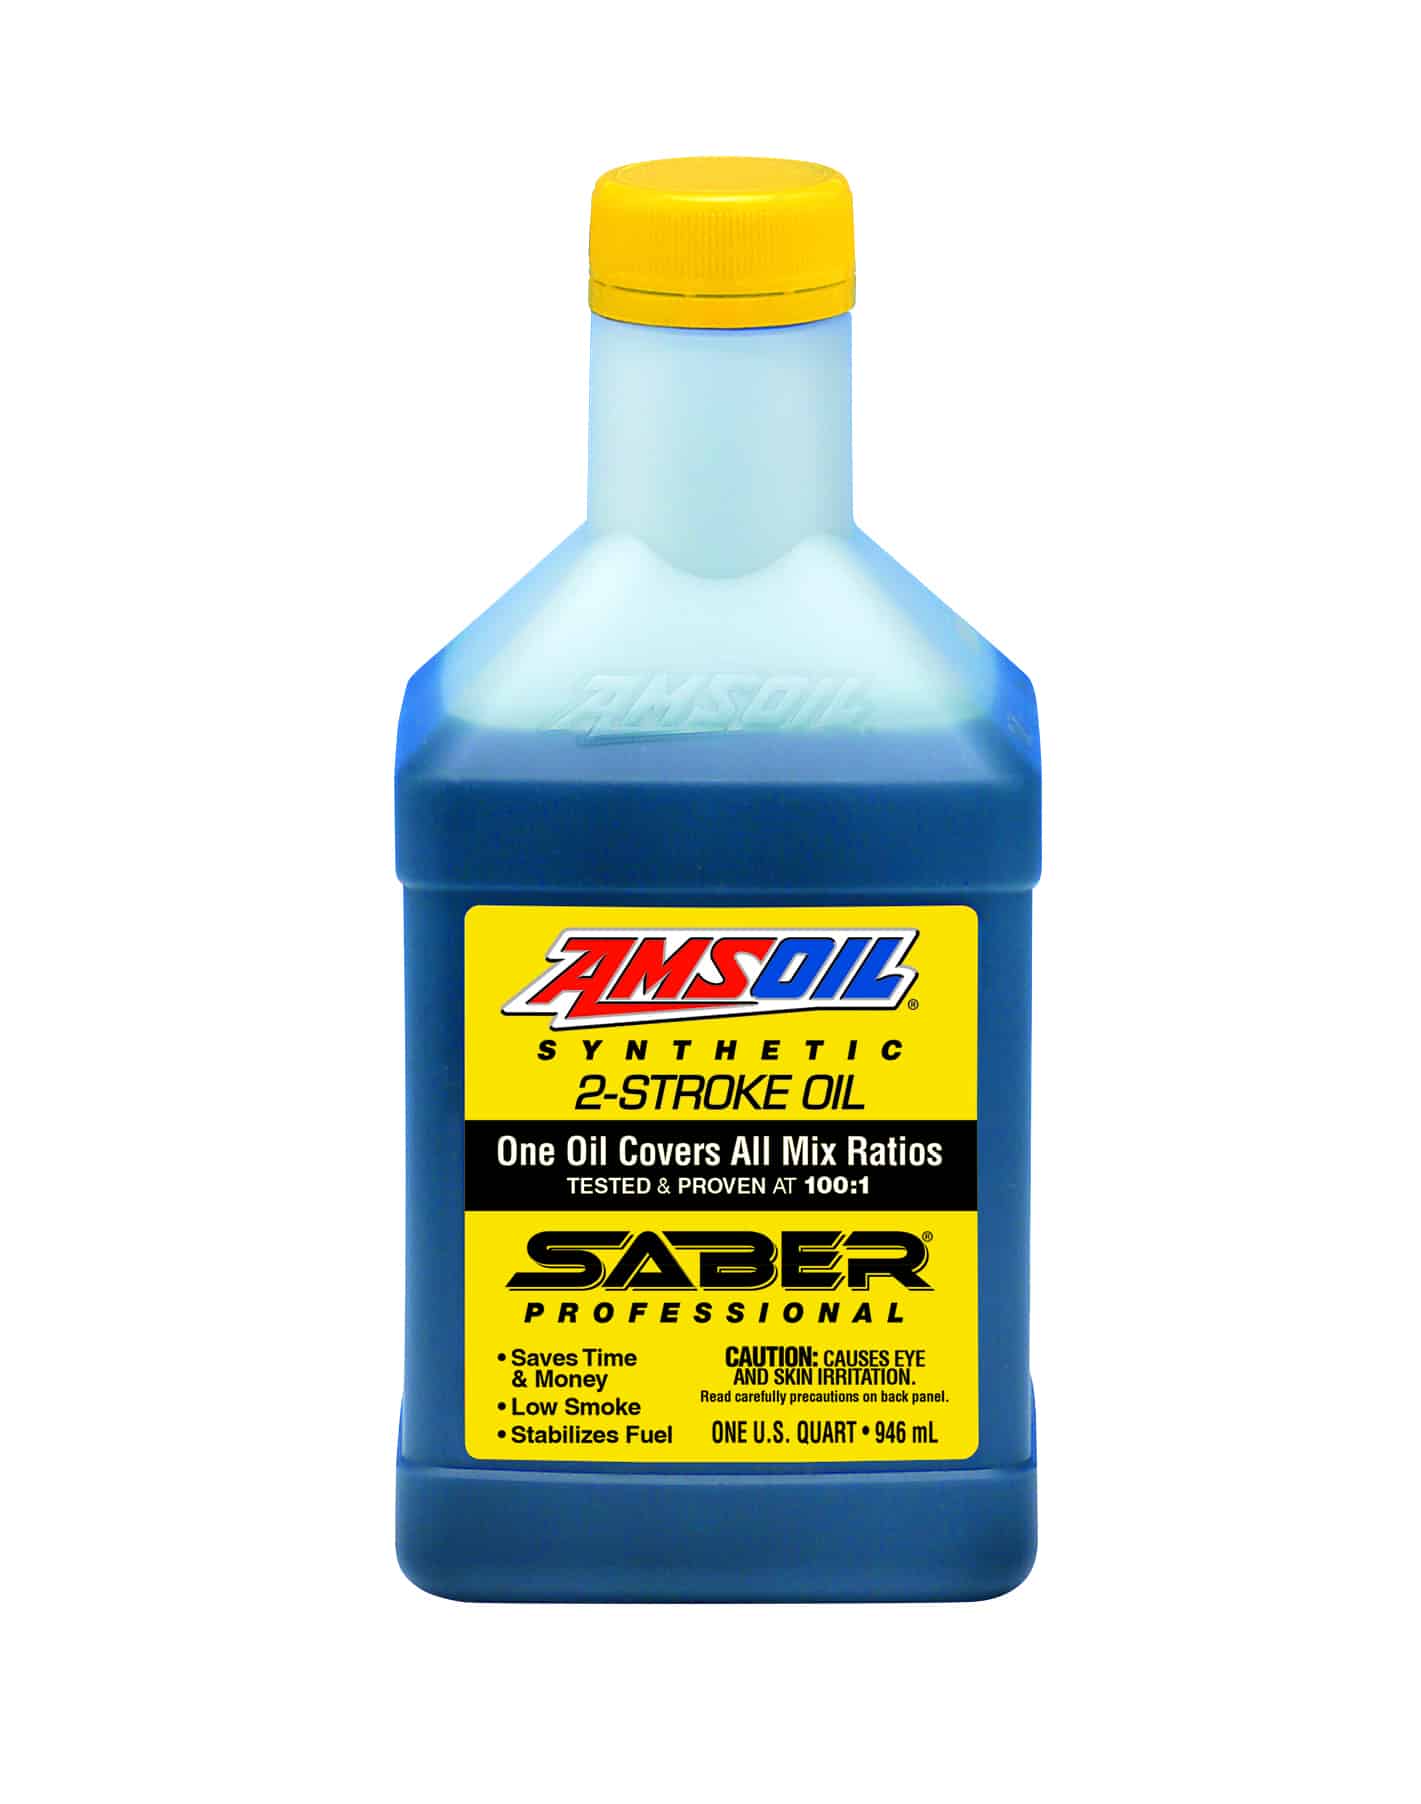 A bottle of AMSOIL SABER® Professional Synthetic 2-Stroke Oil. It does a better job fighting carbon deposits that rob engines of power & reduces their service life.